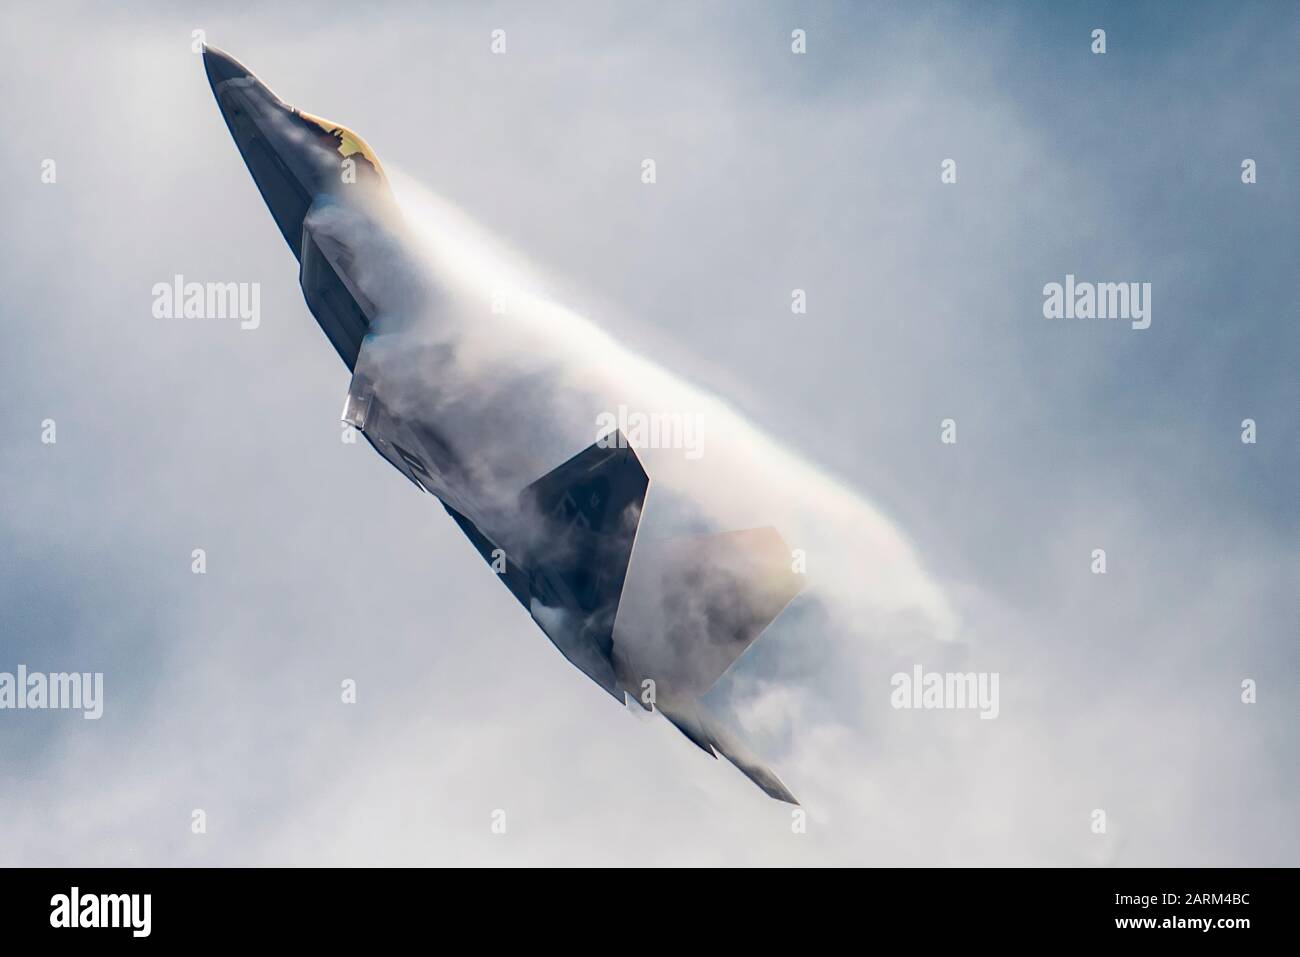 U.S. Air Force Maj. Paul Lopez, F-22 Demo Team commander, performs the power loop maneuver during the Spirit of St. Louis Air Show Sept. 7-8, 2019. Utilizing the thrust vectoring technology of the world's premier 5th-generation fighter, the power loop showcases the Raptor's ability to perform a complete backwards rotation through the air while remaining completely stationary. (U.S. Air Force photo by 2nd Lt. Sam Eckholm) Stock Photo